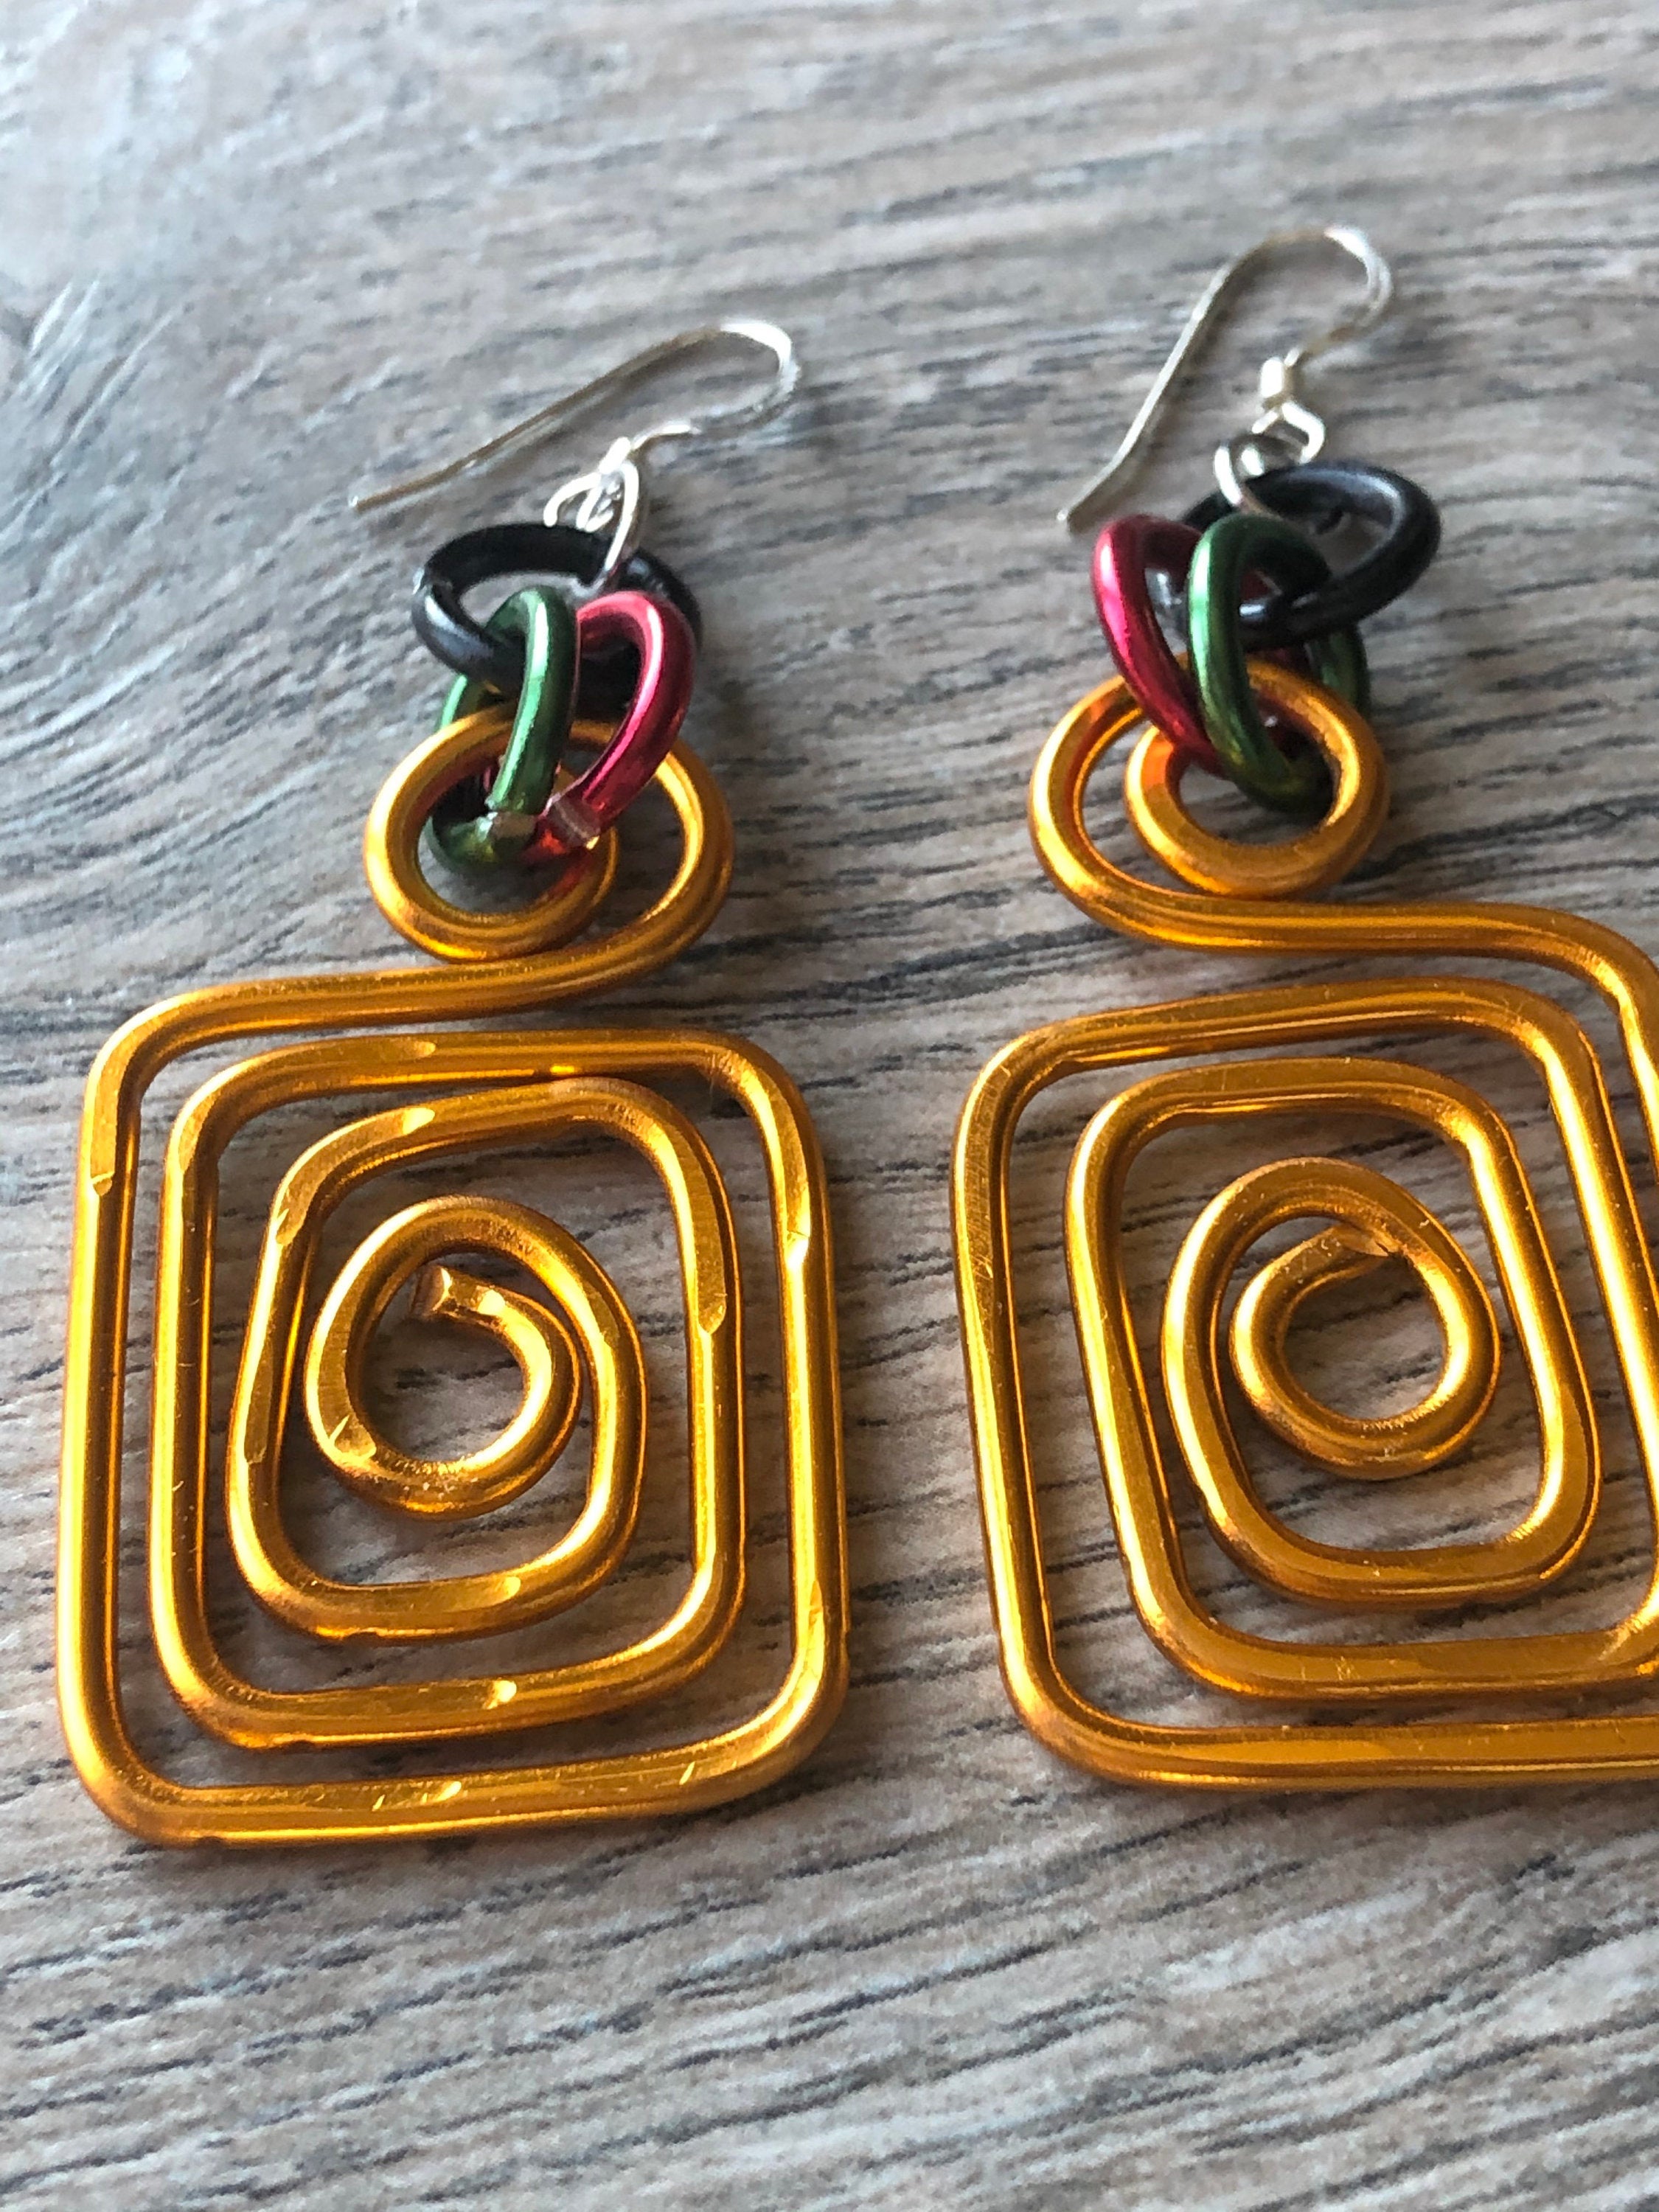 Gold Earrings, Black Panther Inspired Earrings, Square Afrocentric Earrings